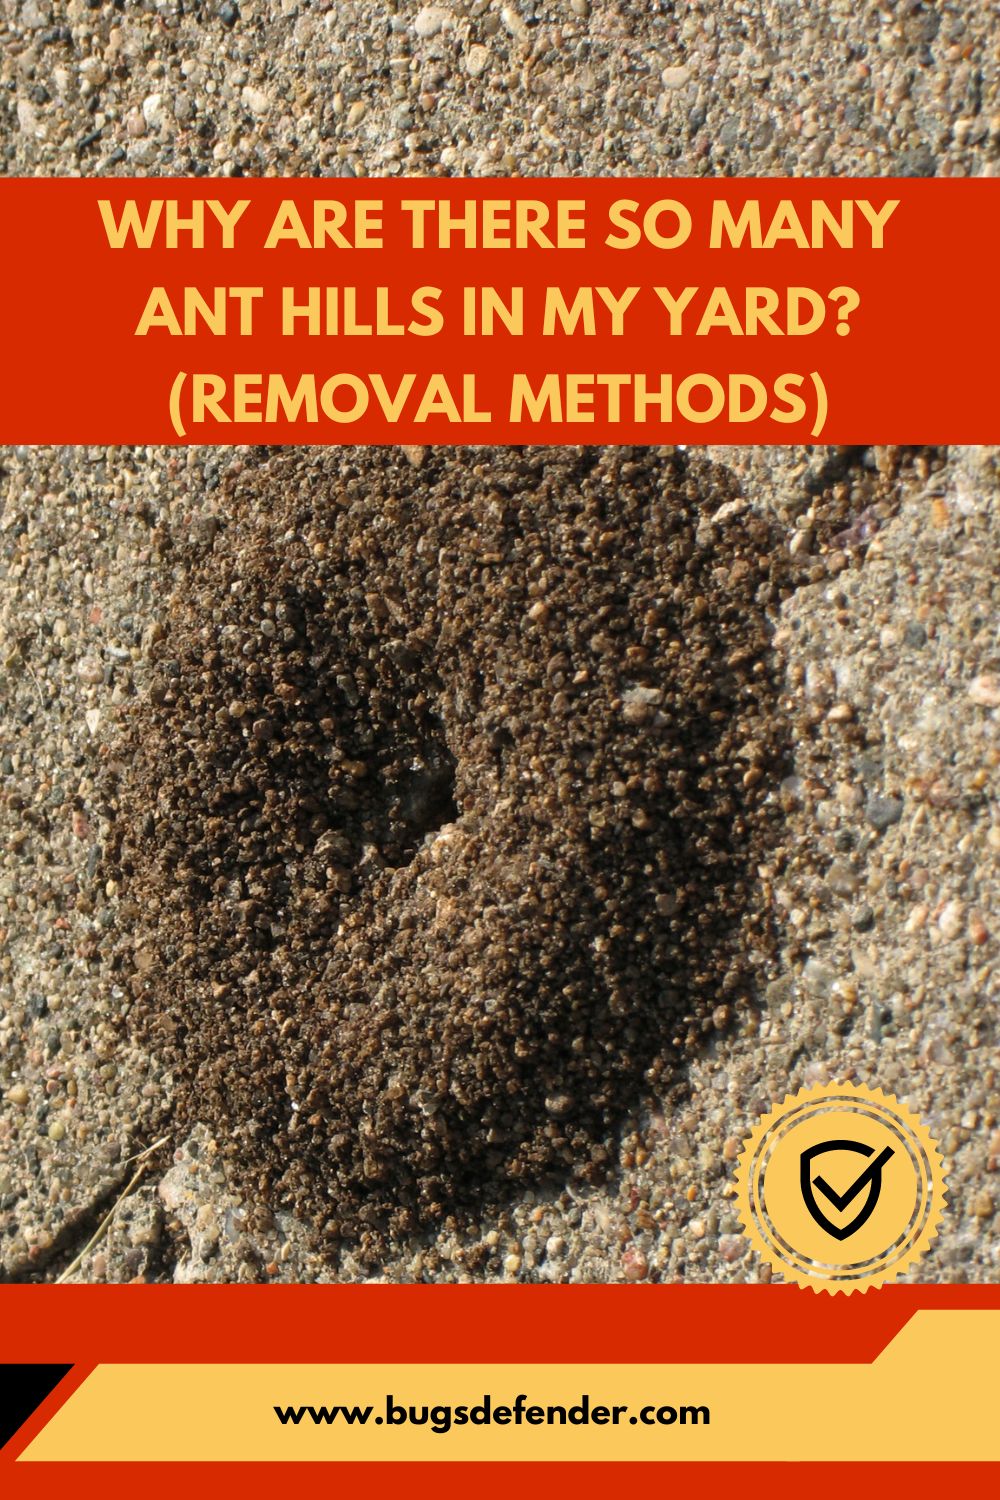 Why Are There So Many Ant Hills in My Yard? (Removal Methods) pin1